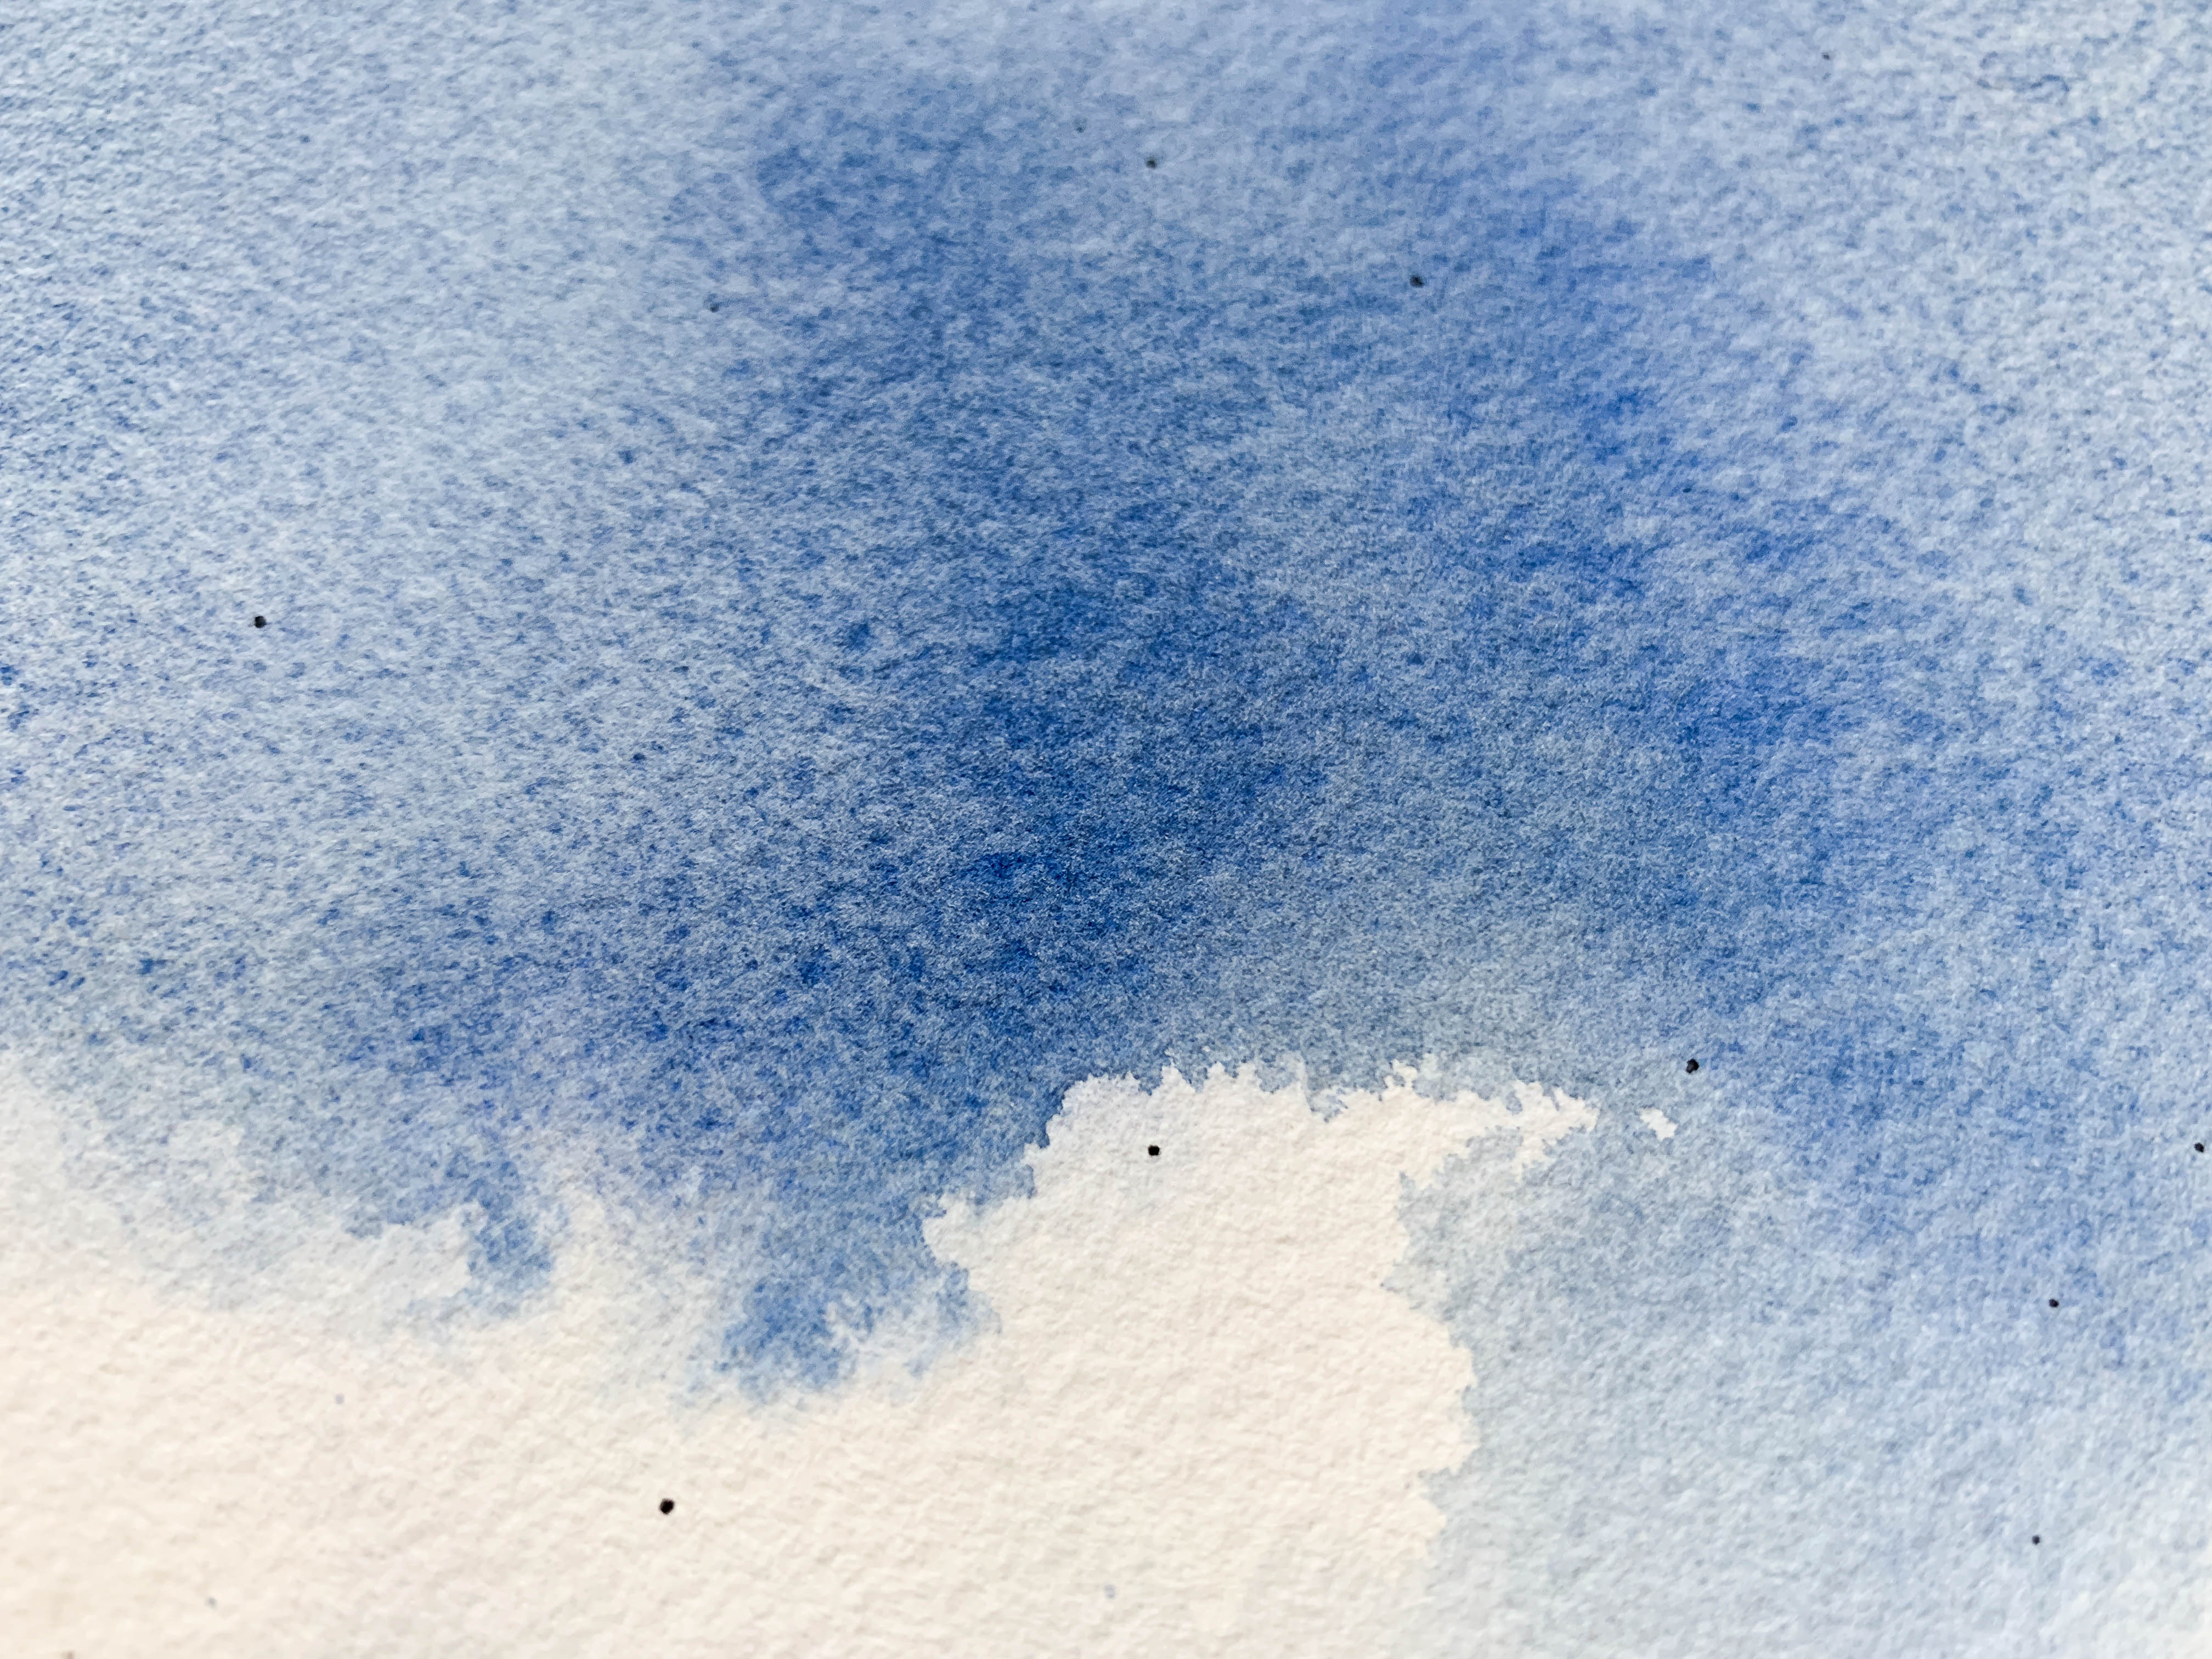 Granulation on watercolour paper demonstrating pigment sinking into the paper texture's dimples or 'holes'